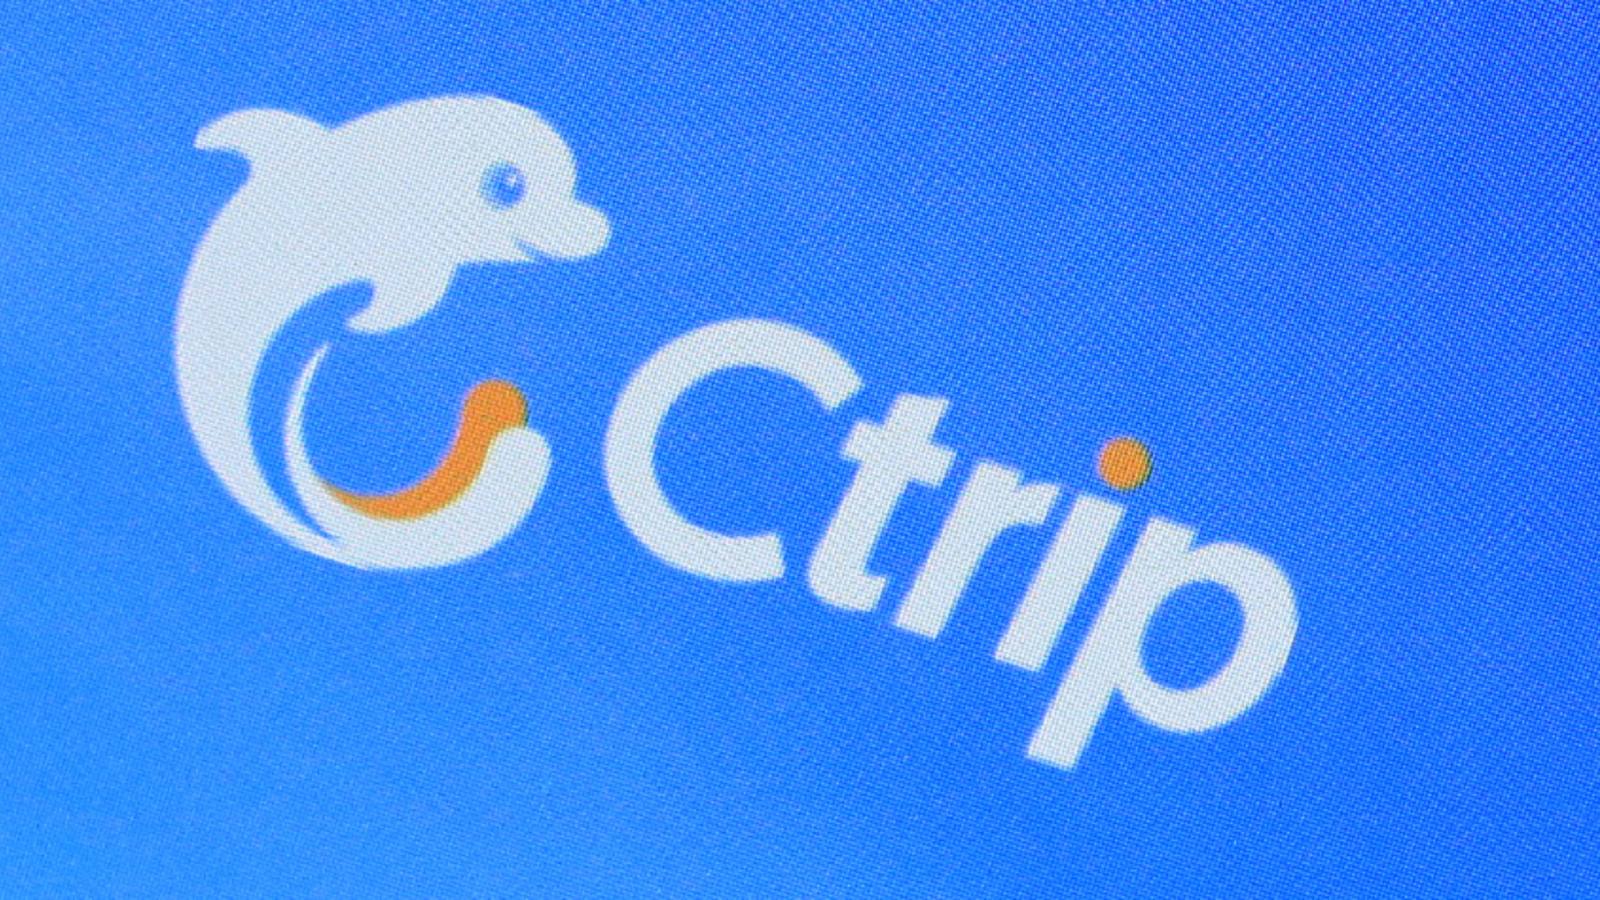 Ctrip Logo - Ctrip's profit dragged down by regulations and rising competition ...